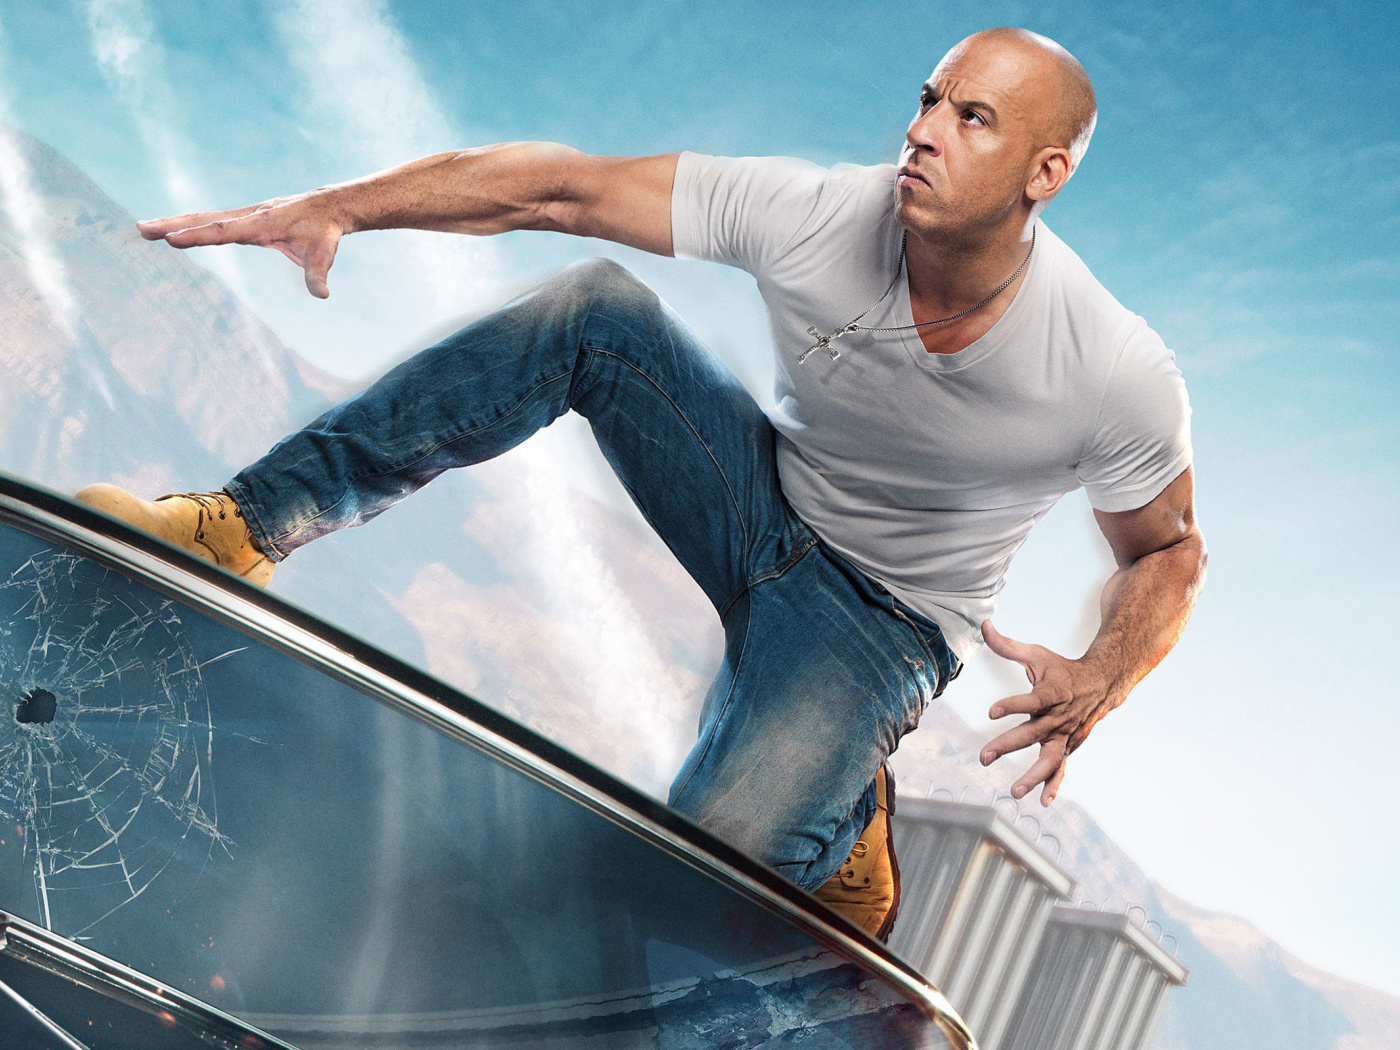 Fast & Furious Supercharged Poster with Vin Diesel wallpaper 1400x1050